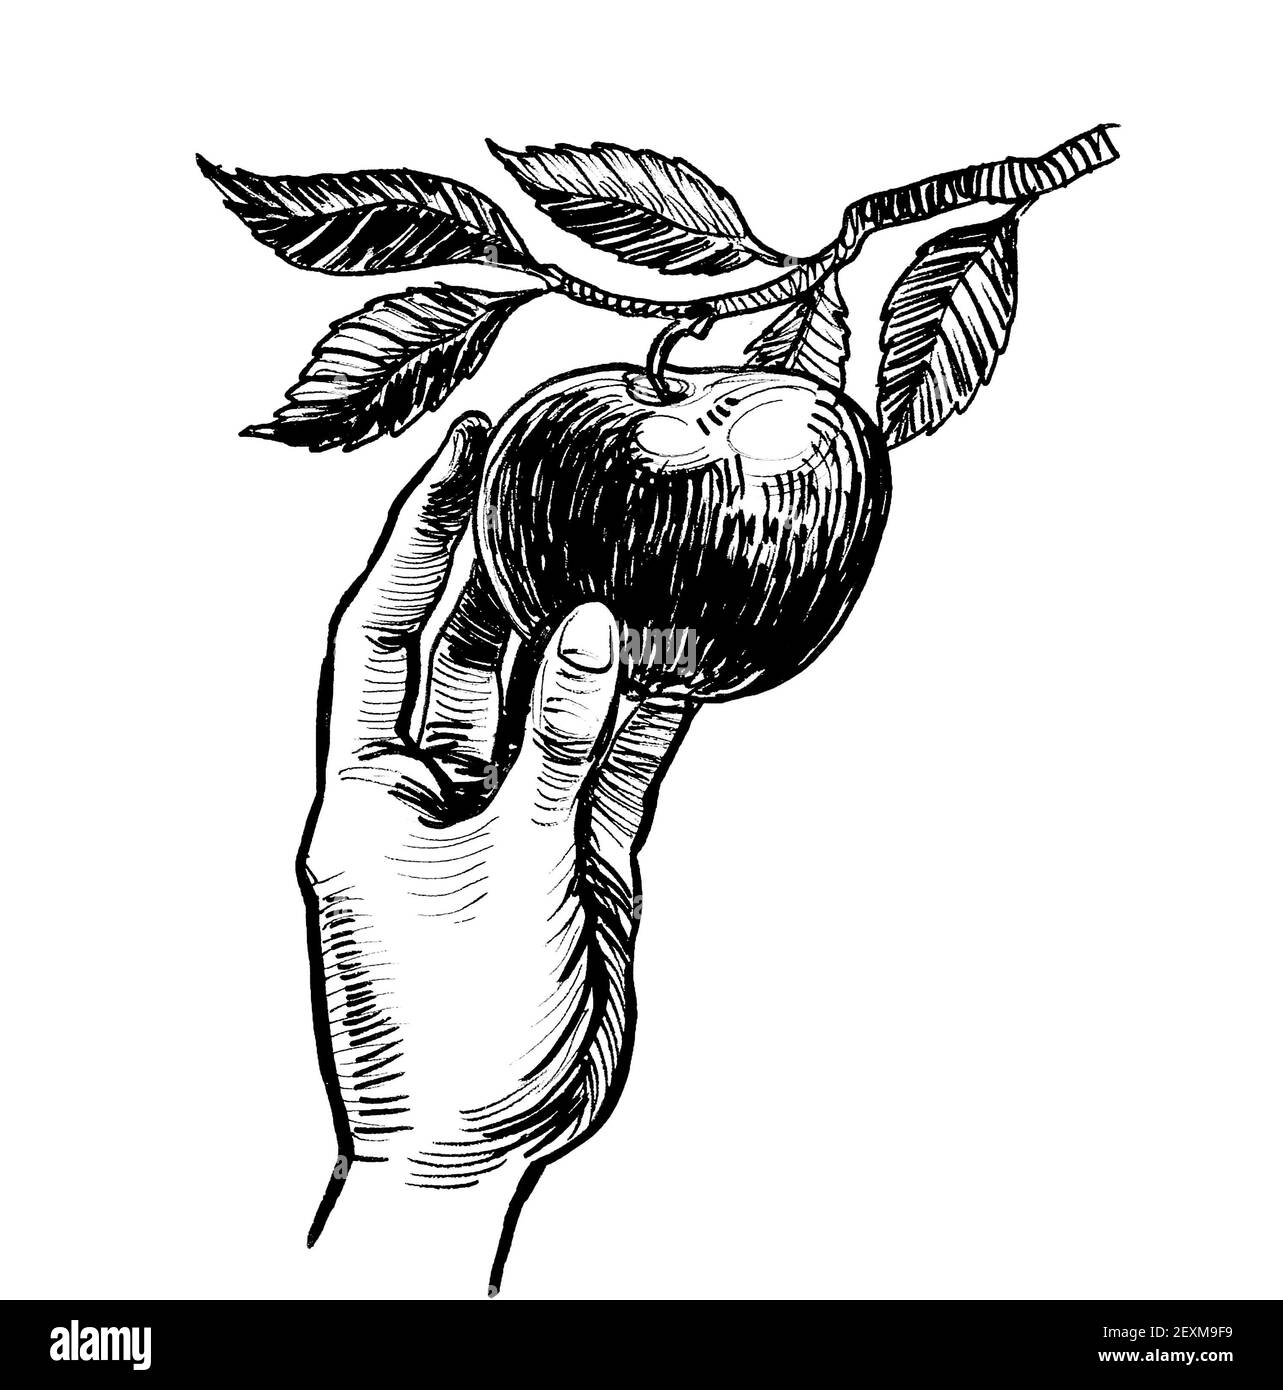 Hand picking apple fruit. Ink black and white drawing Stock Photo